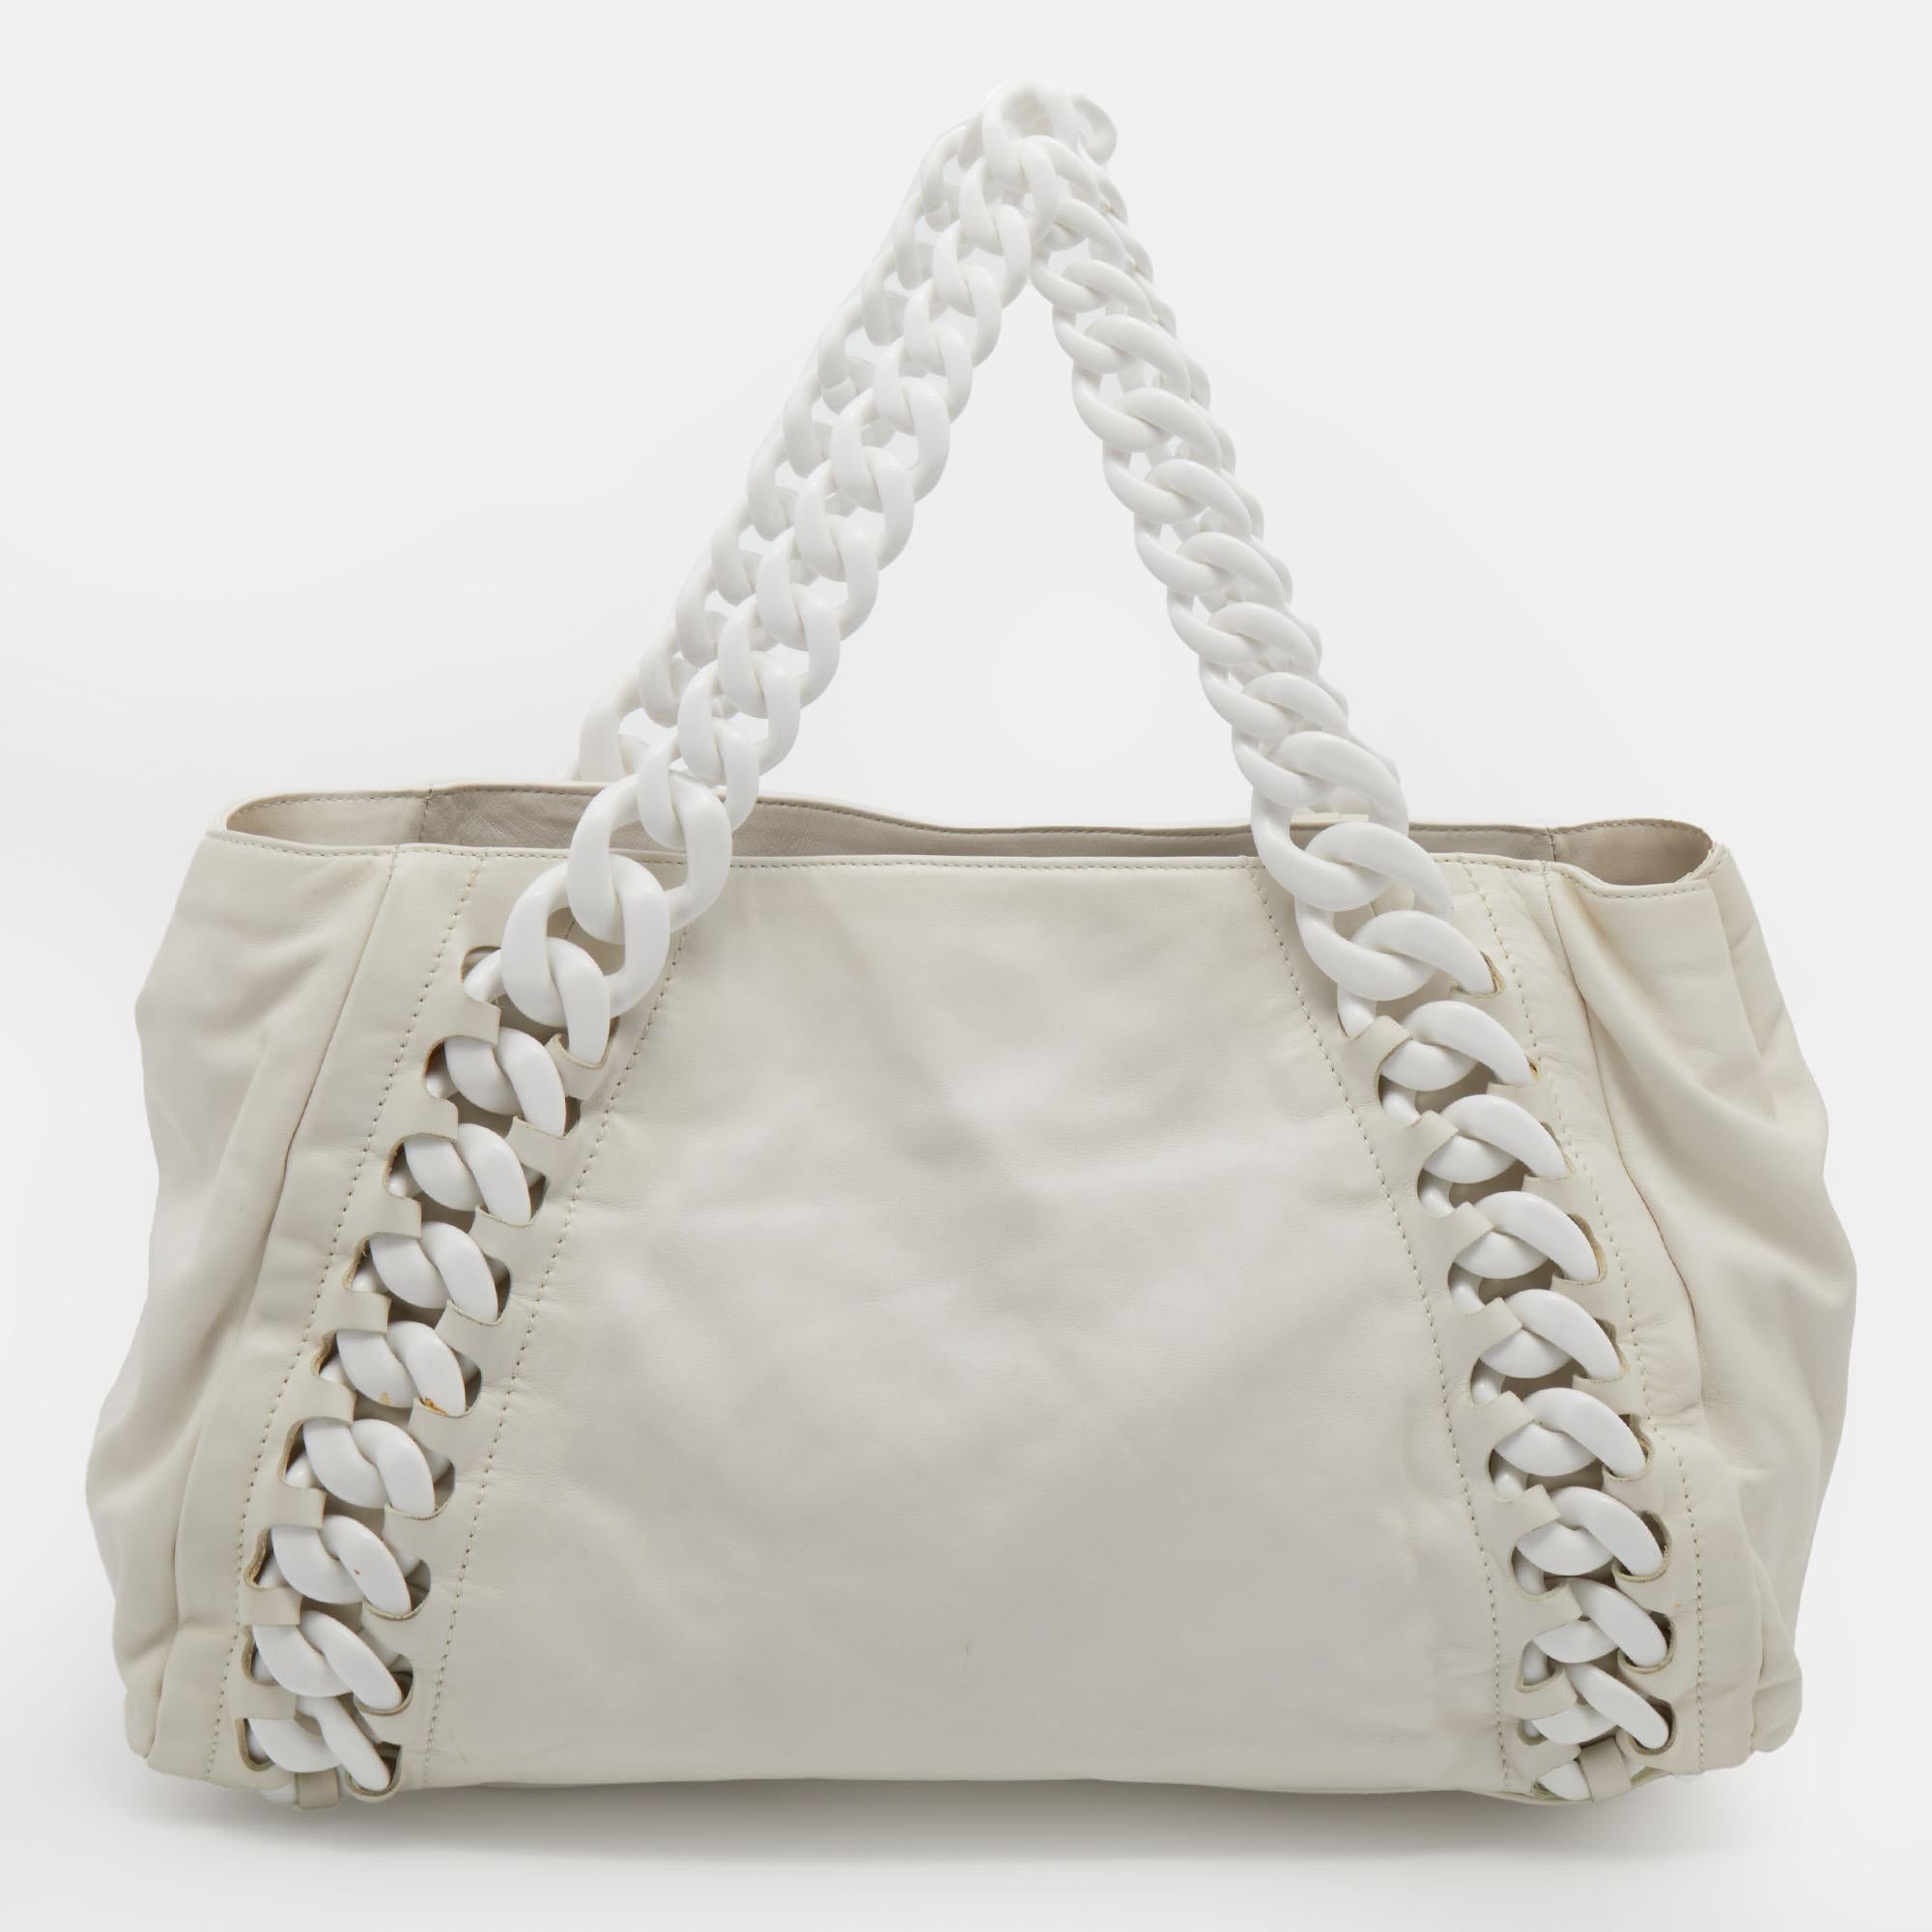 The Chanel tote is ideal for those who commute daily, love shopping, and travel often. Made from white leather, the creation is highlighted with a CC front logo and attached with chain trims. The spacious interior makes it a fashion-meets-function